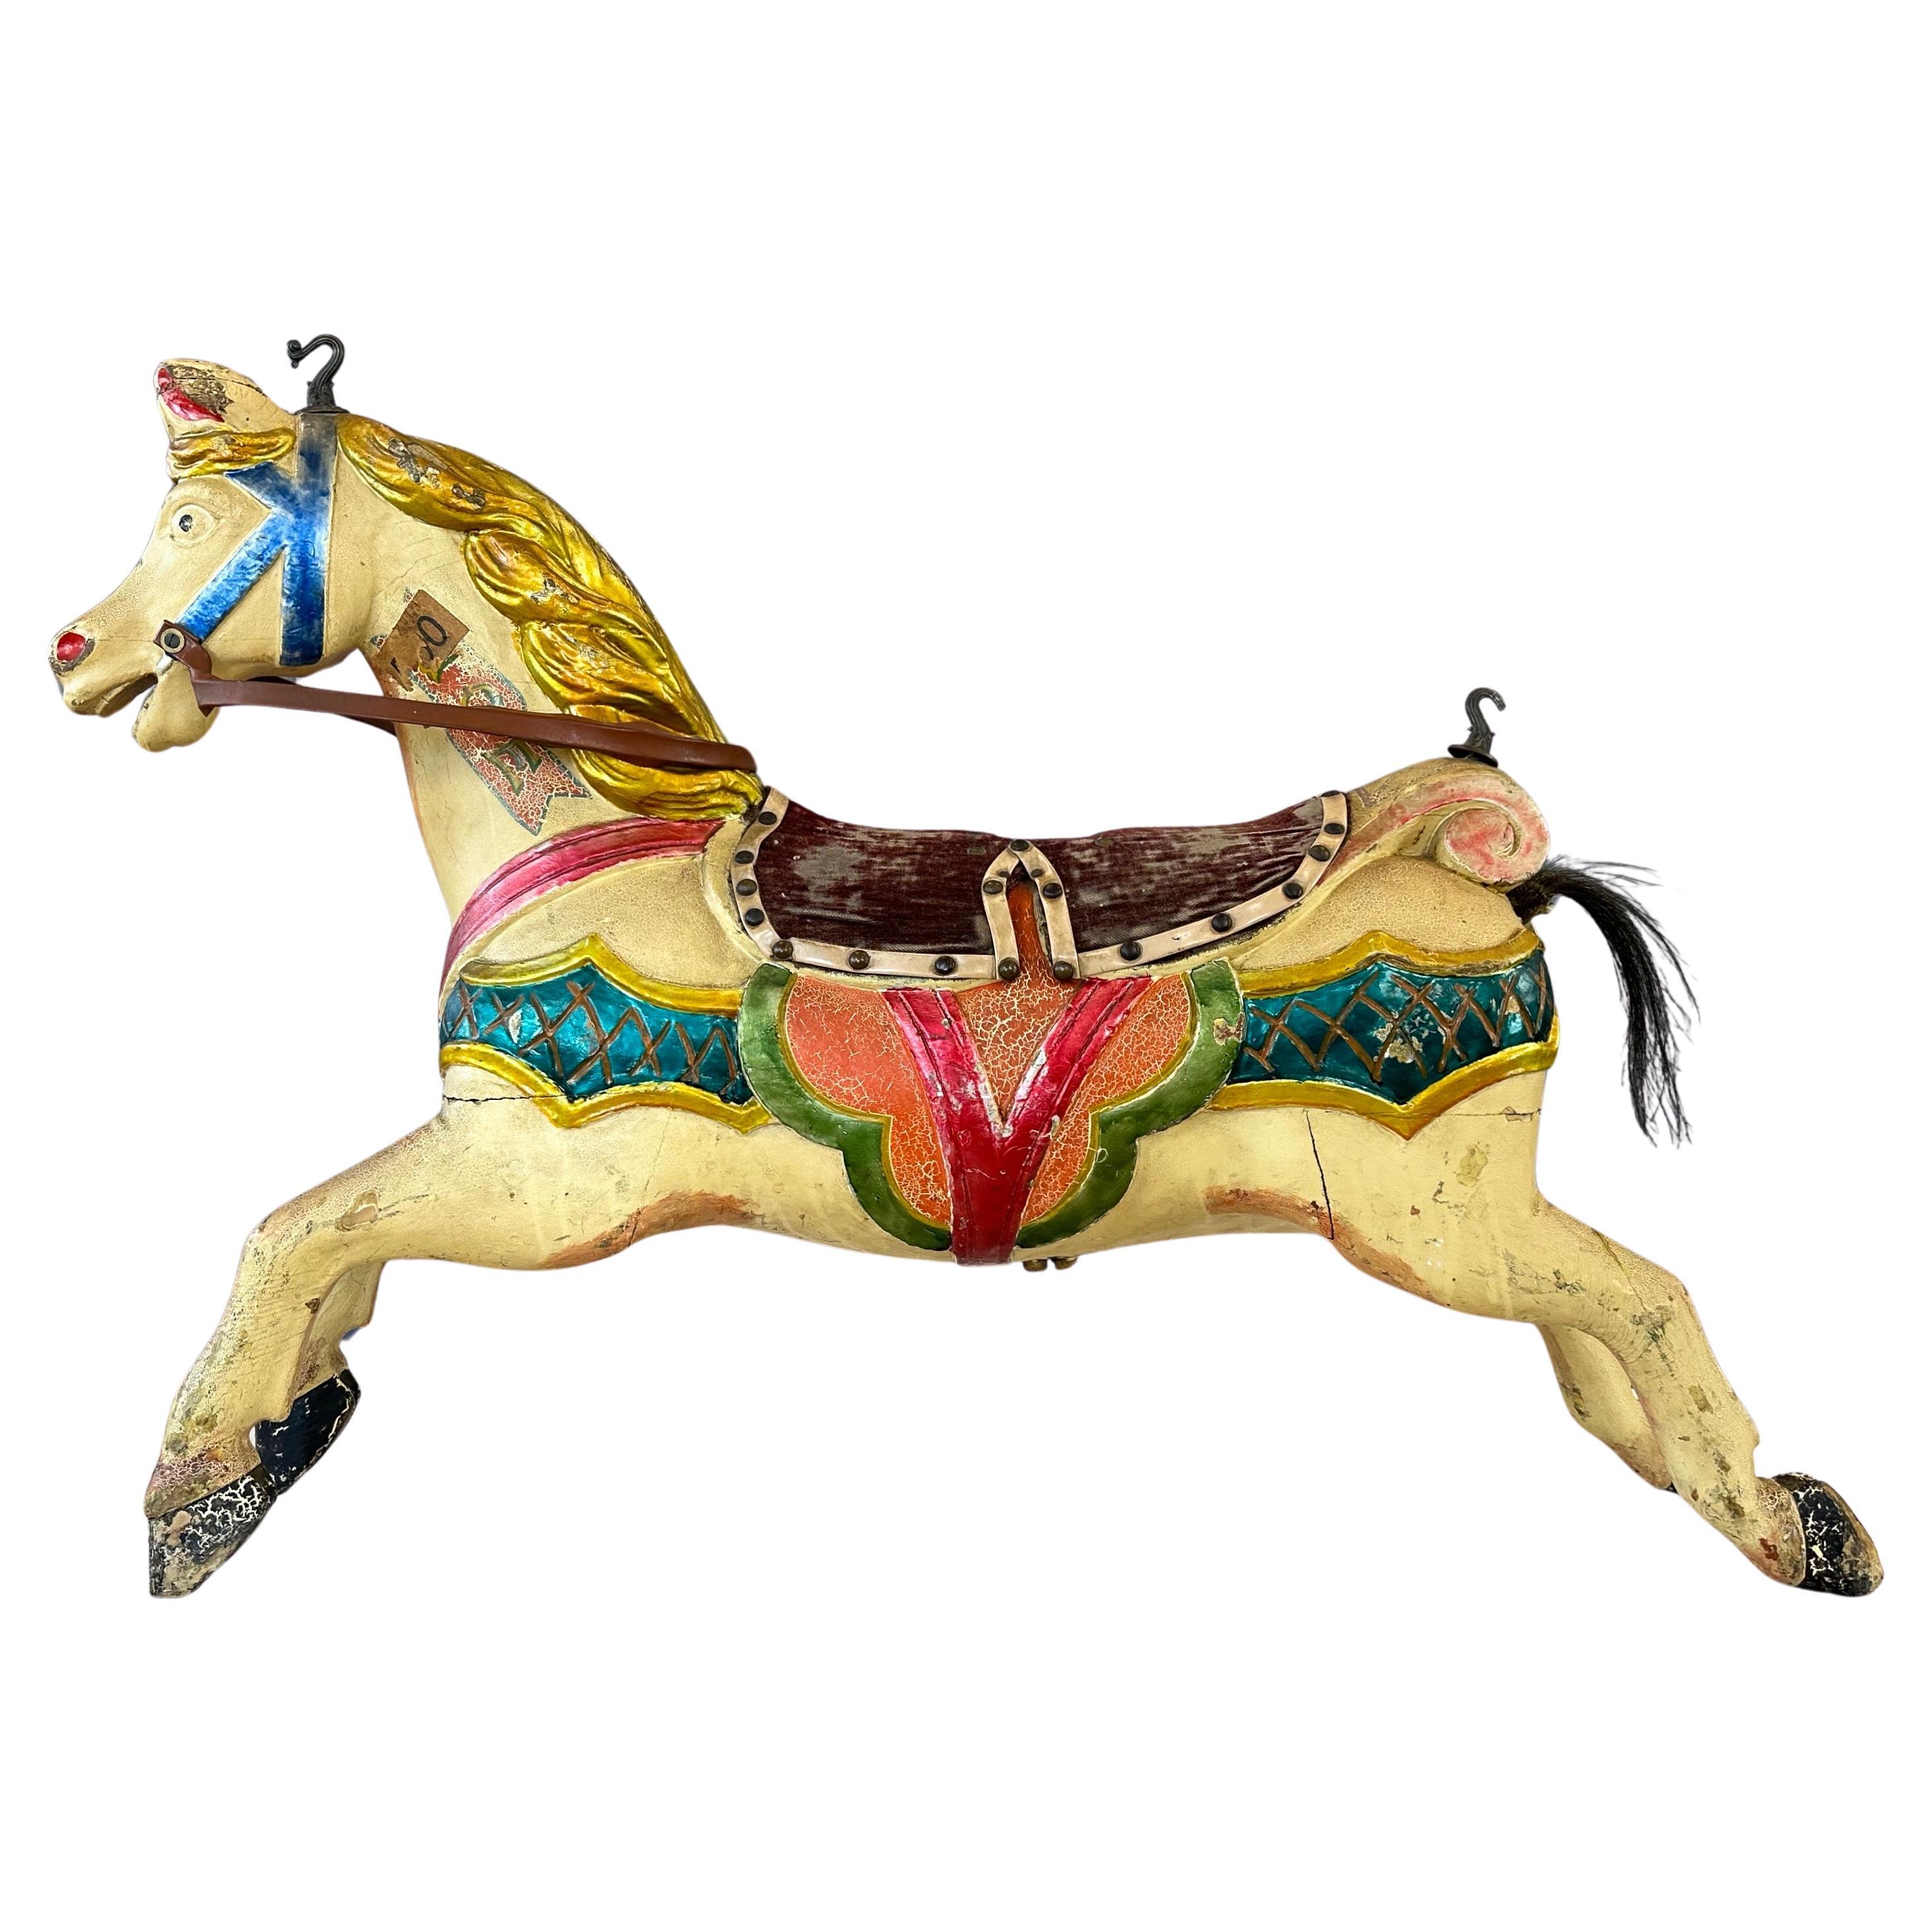 How can I tell if a carousel horse is antique?